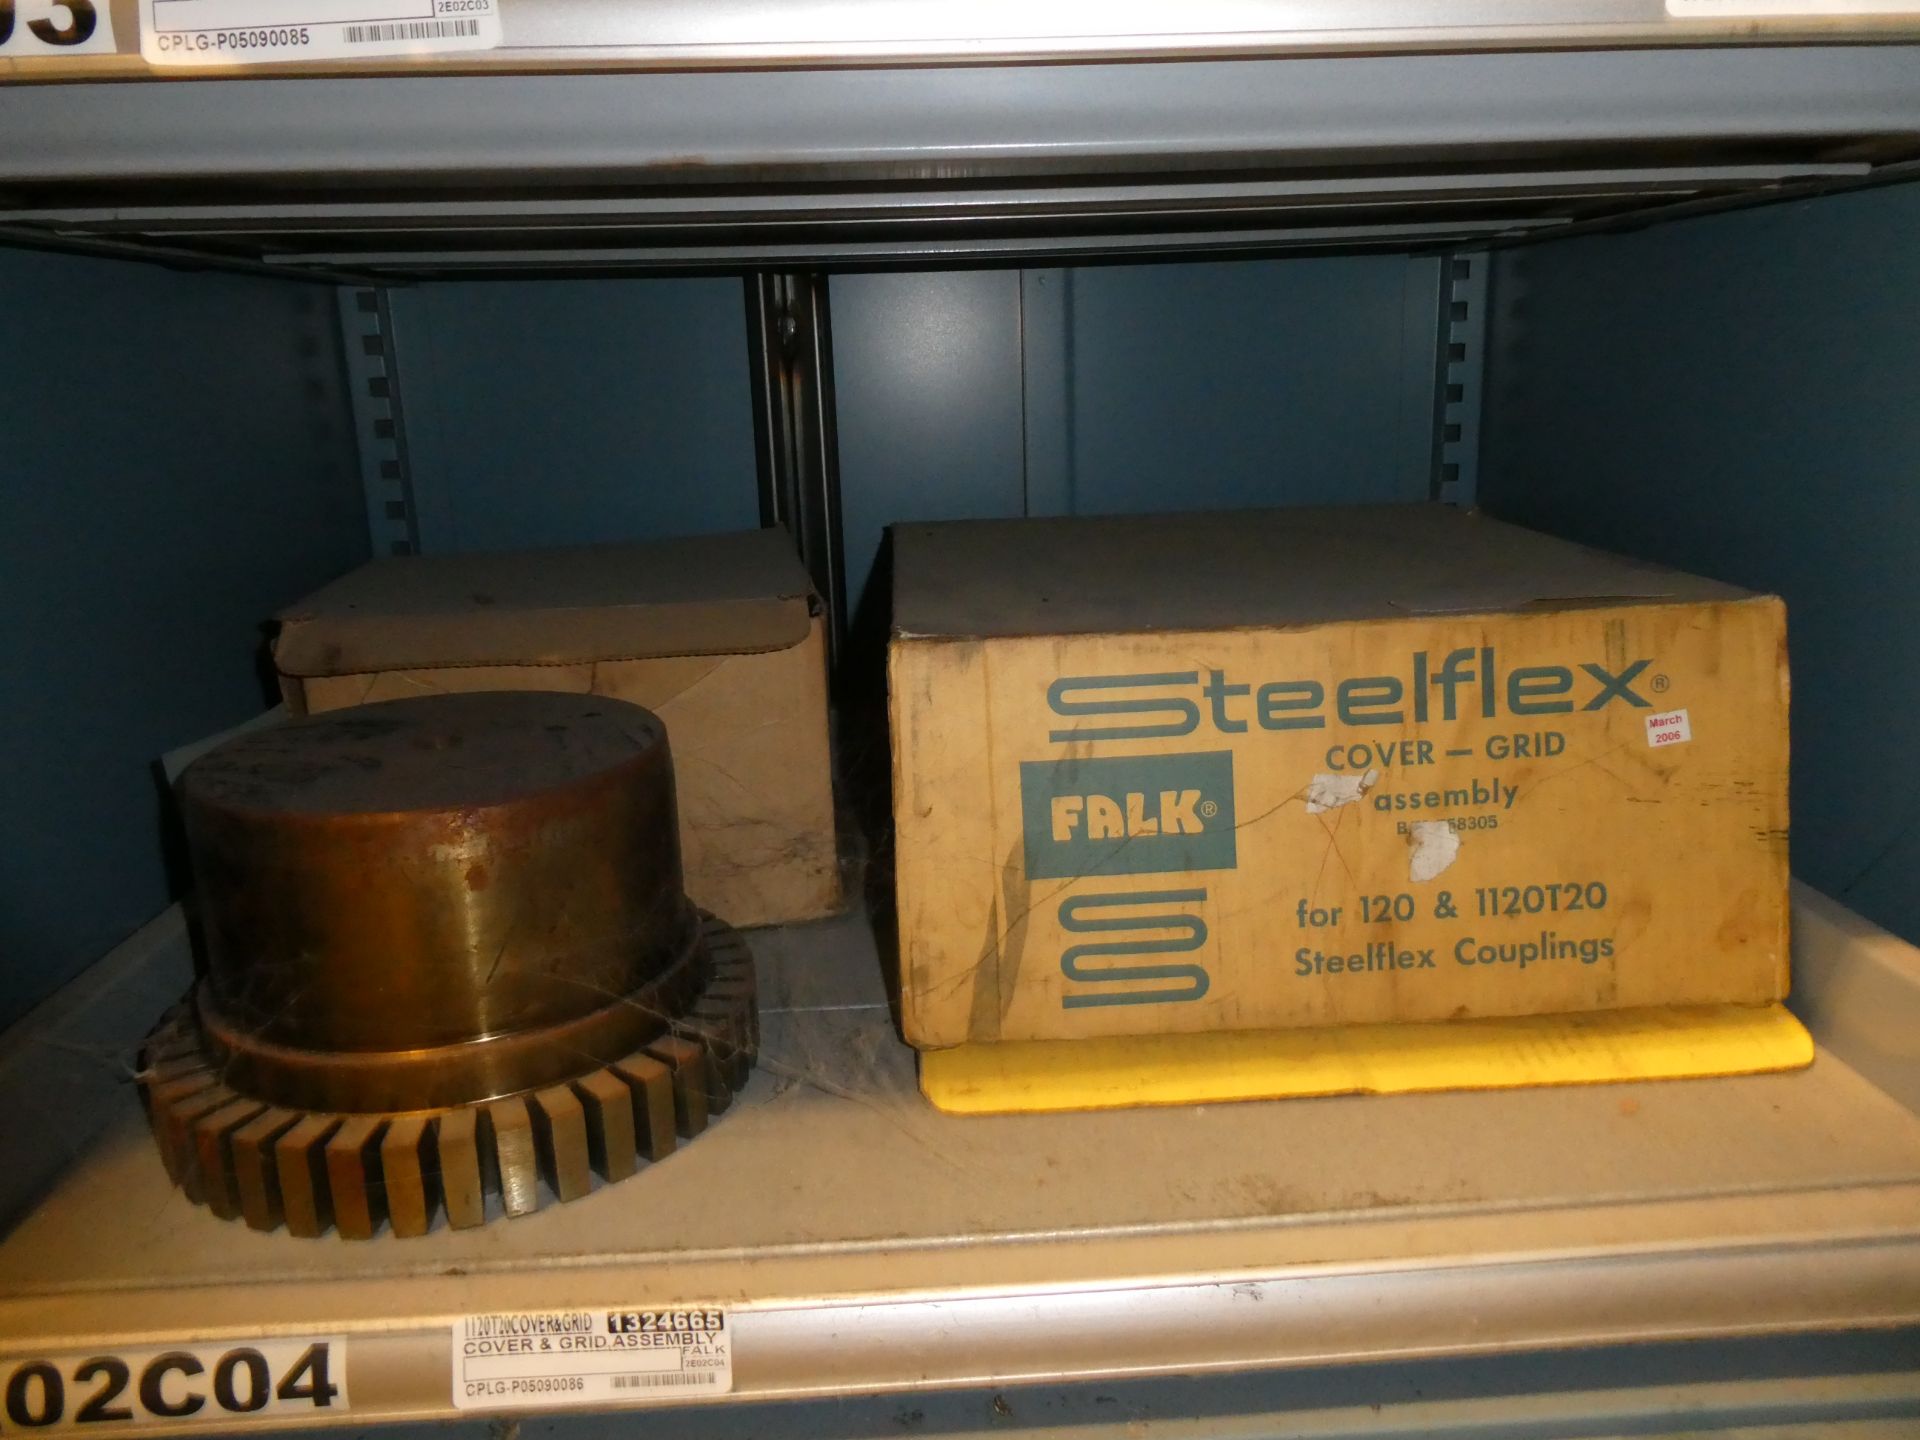 Lista Cabinet w/ Contents - Falk Couplings - Image 4 of 4